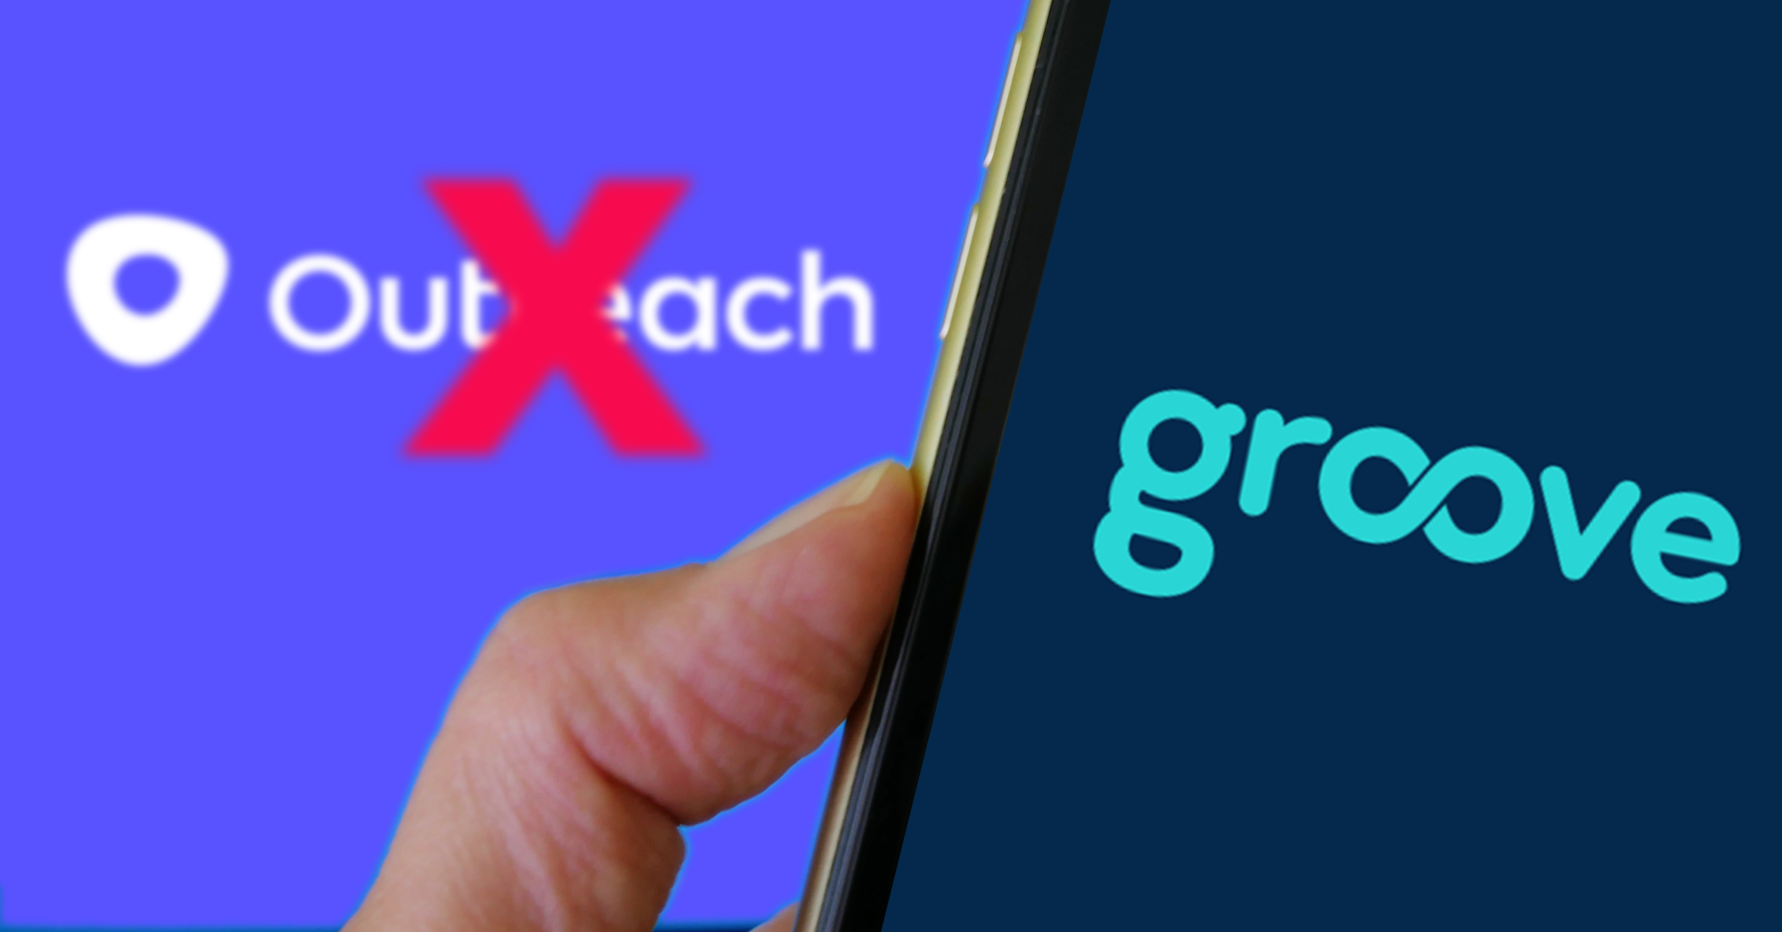 Photograph of the Groove logo on a phone in front of the Outreach logo with a red X on it